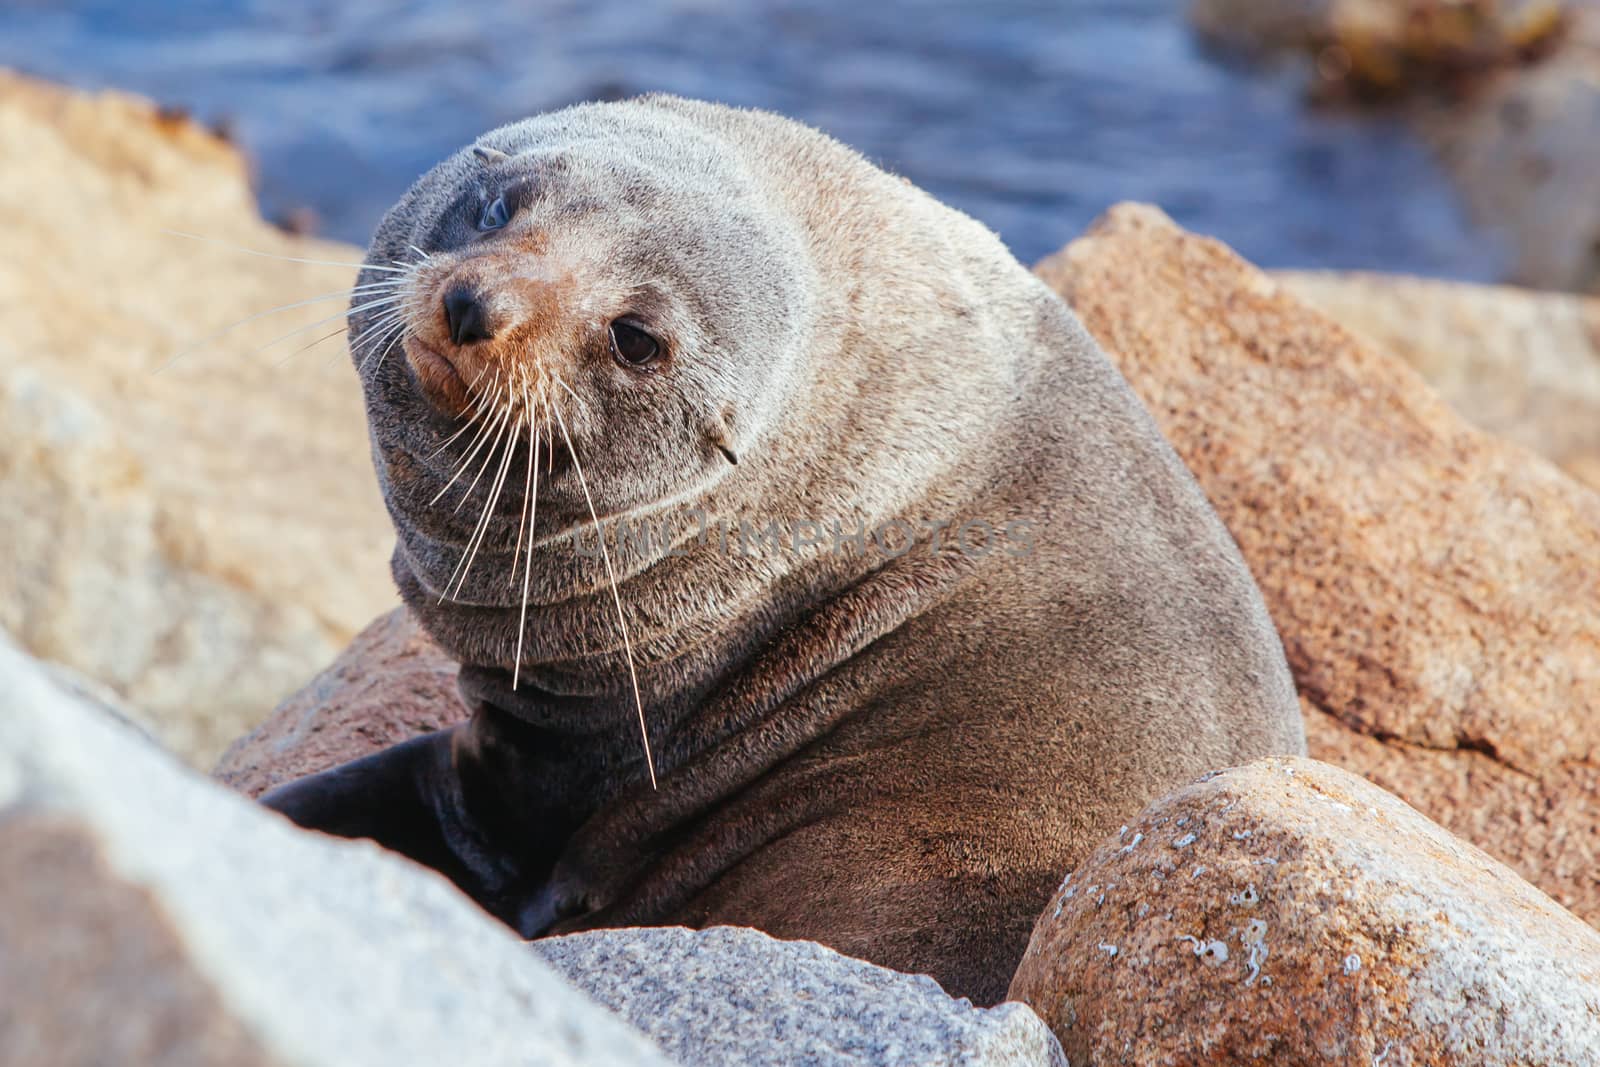 A seal basks in the sun in Narooma, New South Wales, Australia